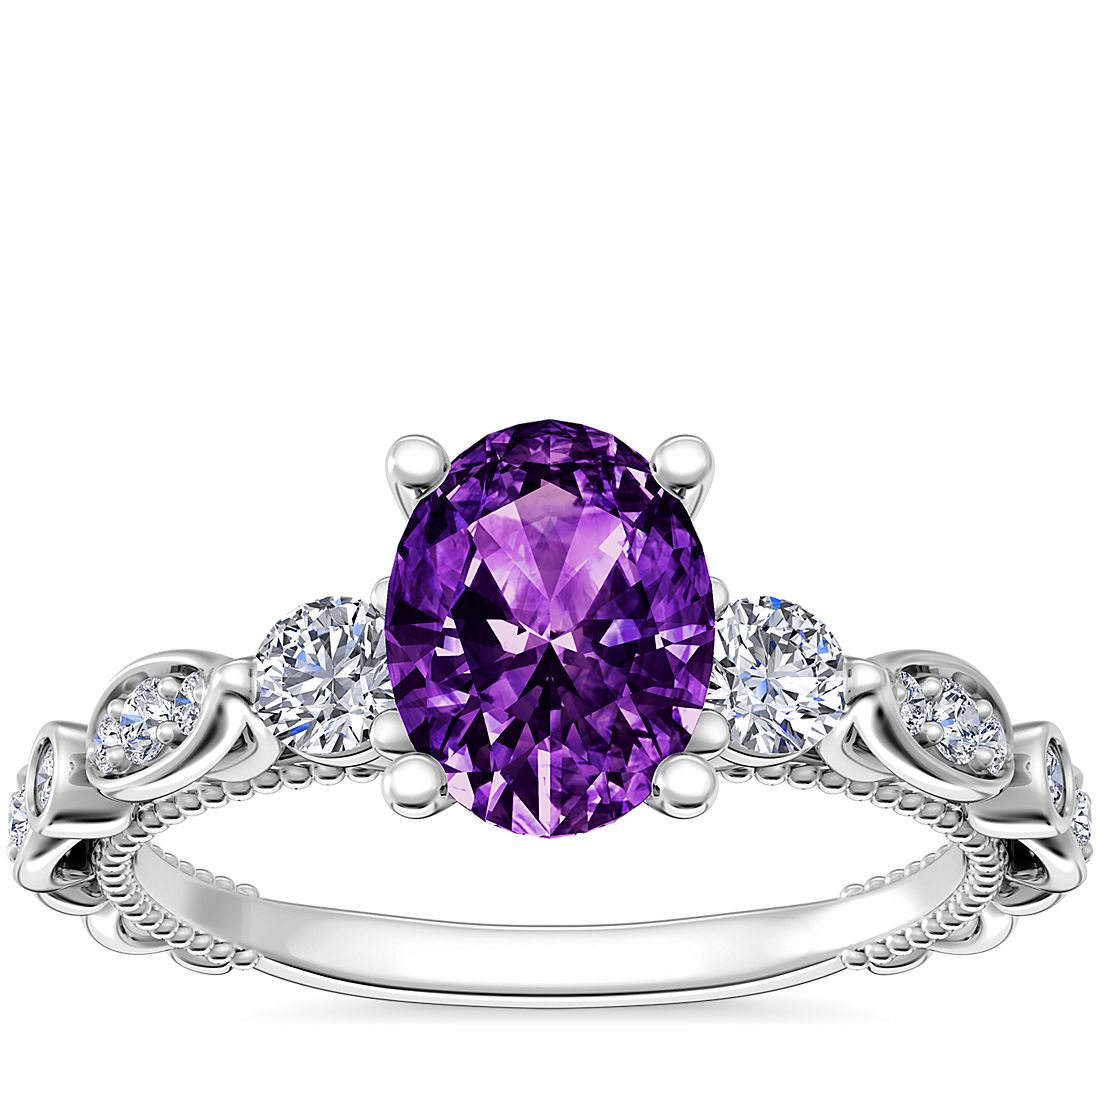 Floral Ellipse Diamond Cathedral Engagement Ring with Oval Amethyst in Platinum (8x6mm)